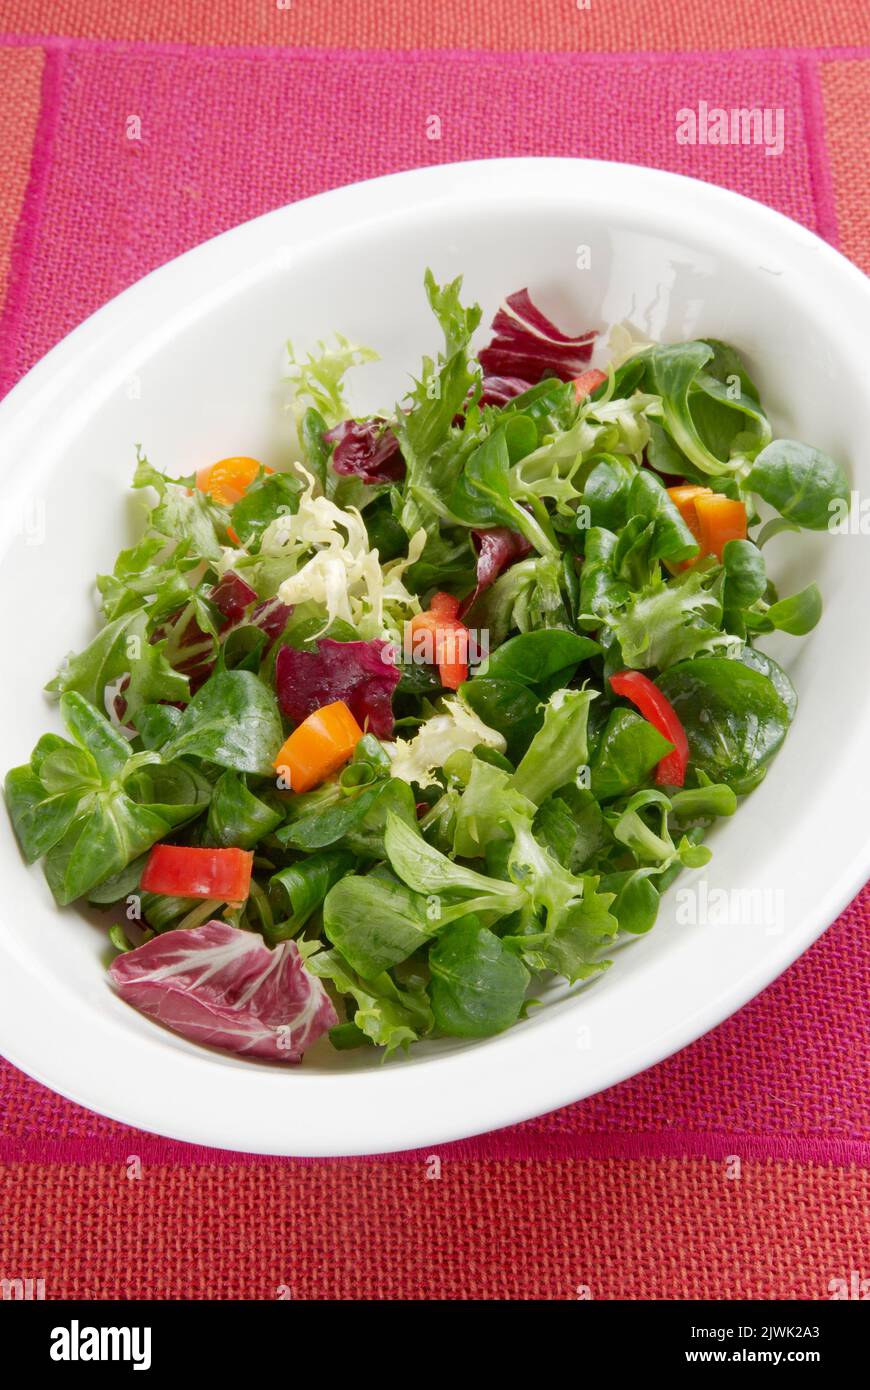 Crispy leaf salad in a white bowl from above Stock Photo